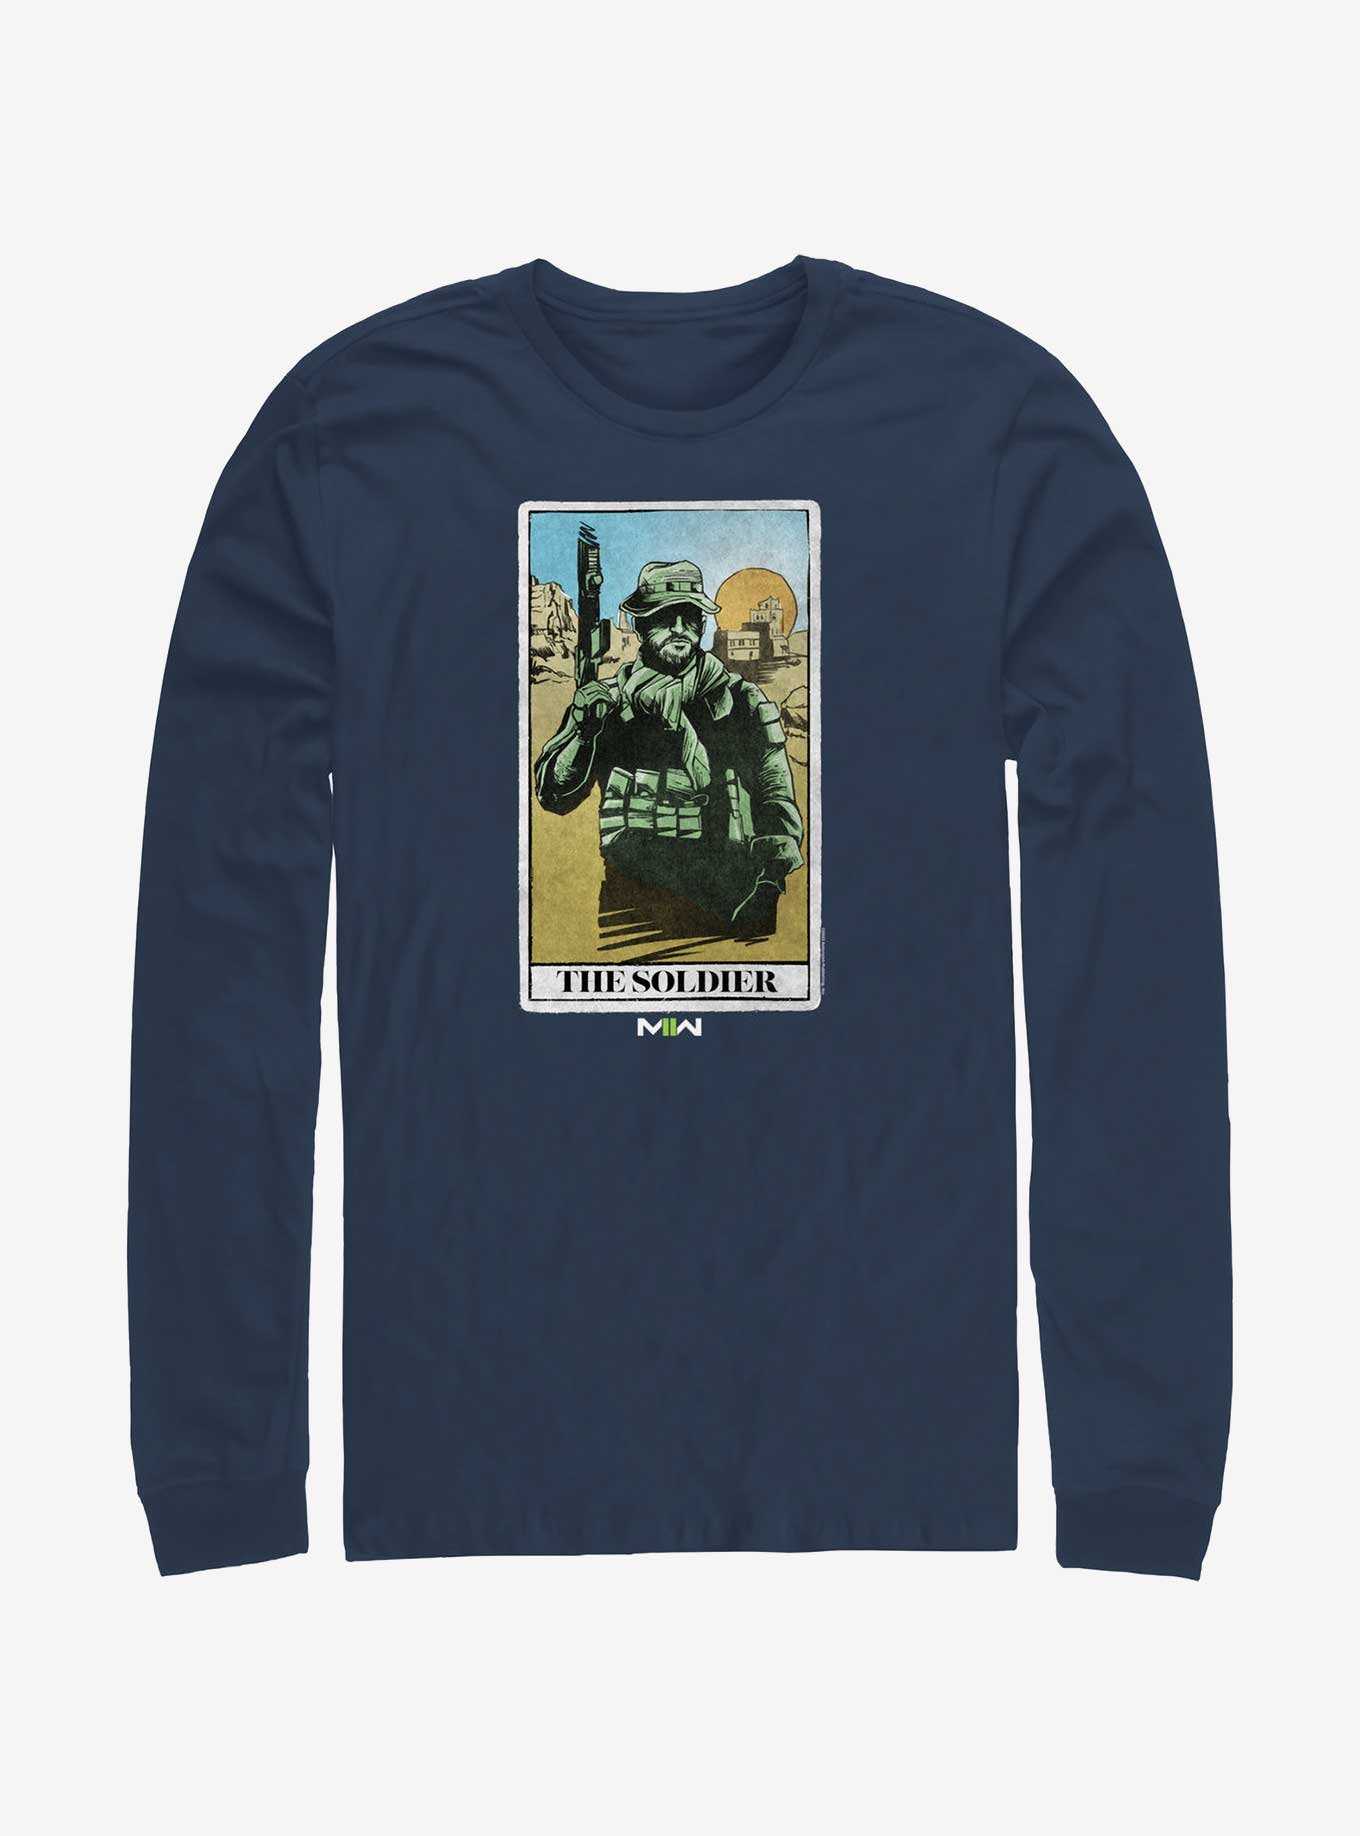 Call of Duty The Soldier Card Long-Sleeve T-Shirt, , hi-res